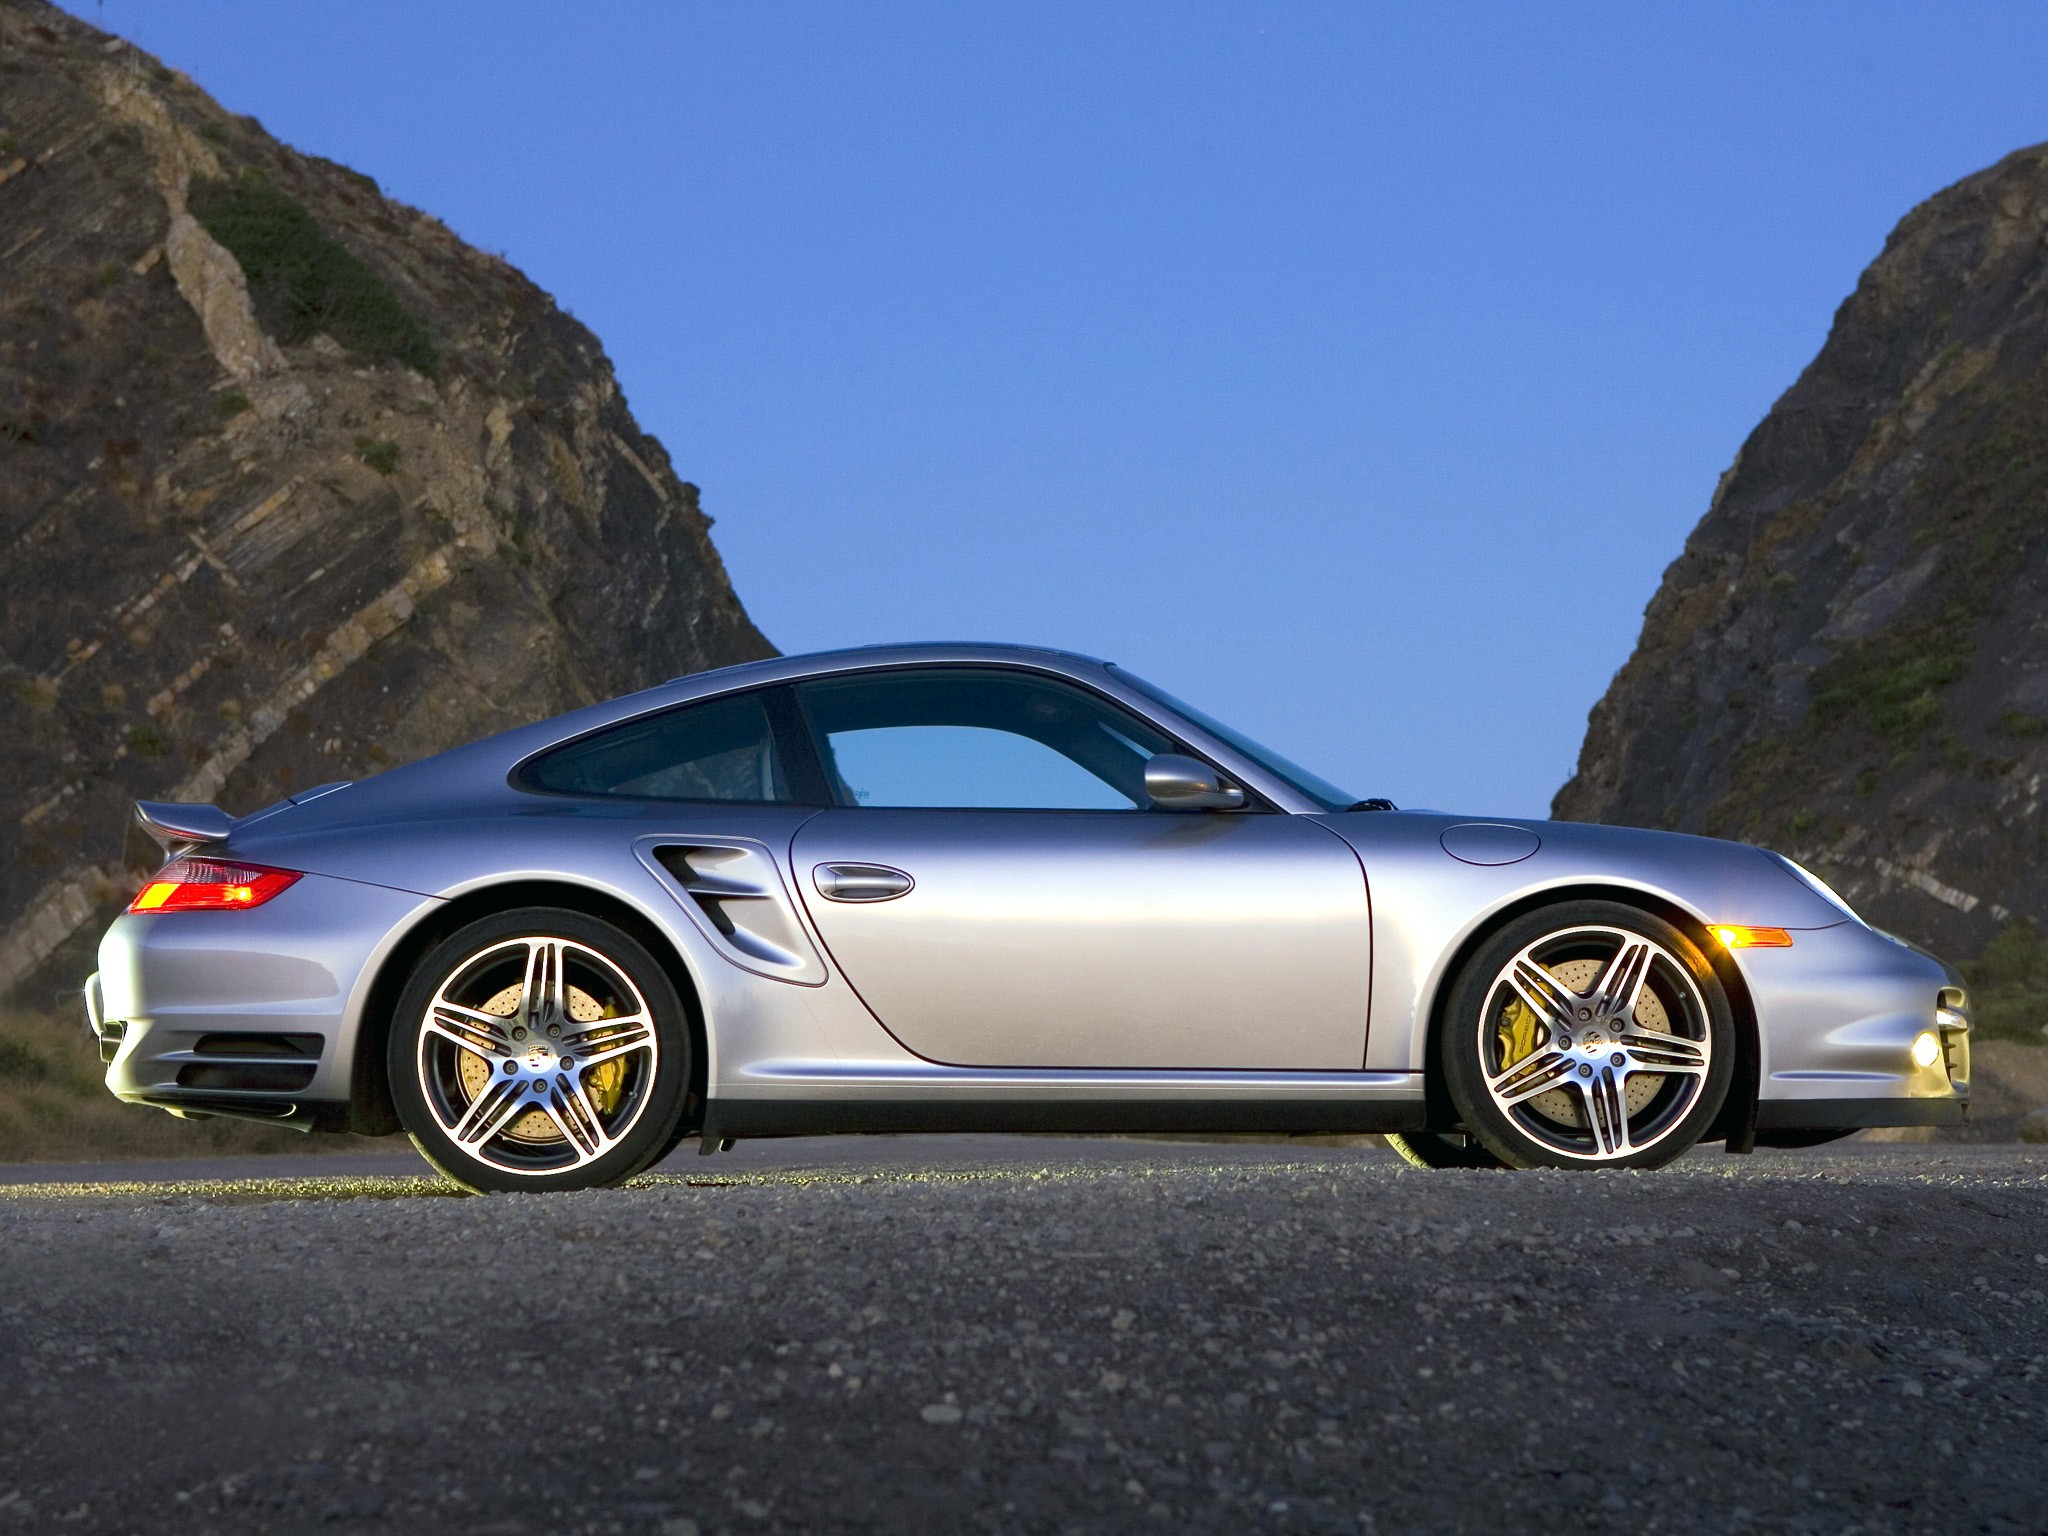 Porsche 911 Turbo Coupe (997) (2008) – Specifications & Performance